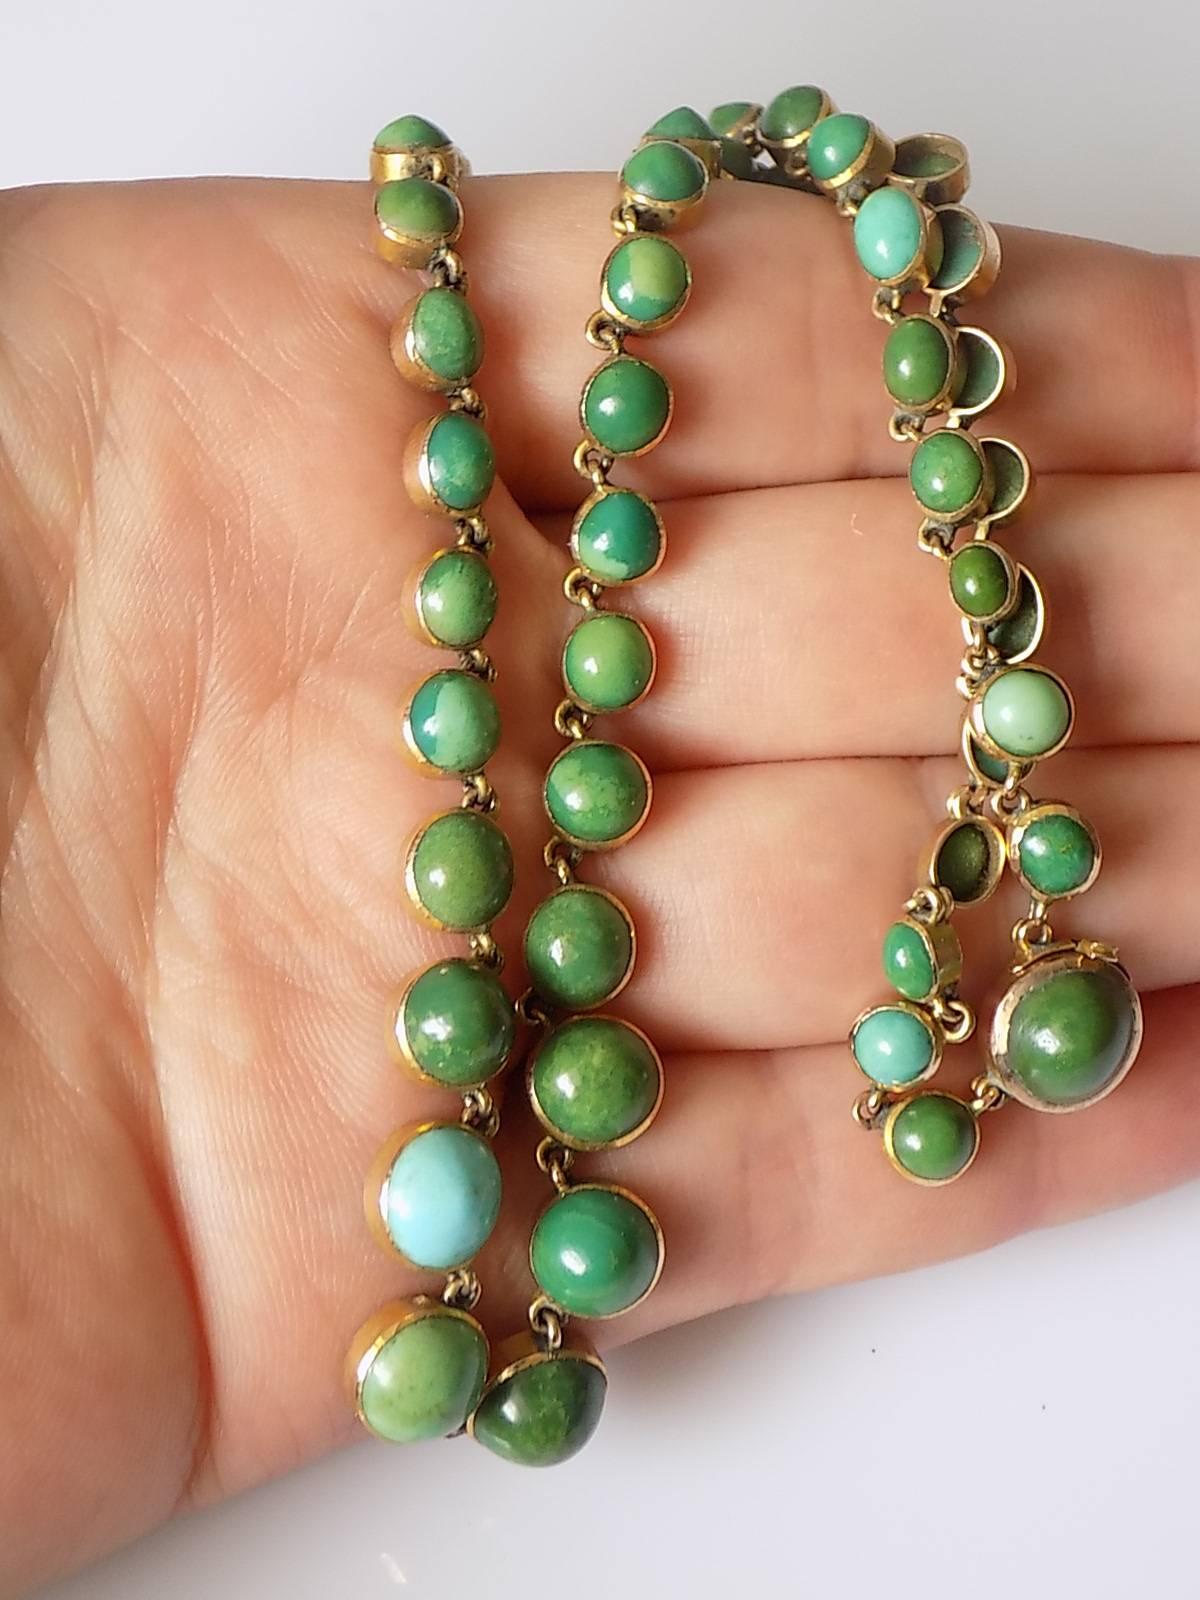 Women's Antique Victorian Turquoise Gold Riviere Necklace